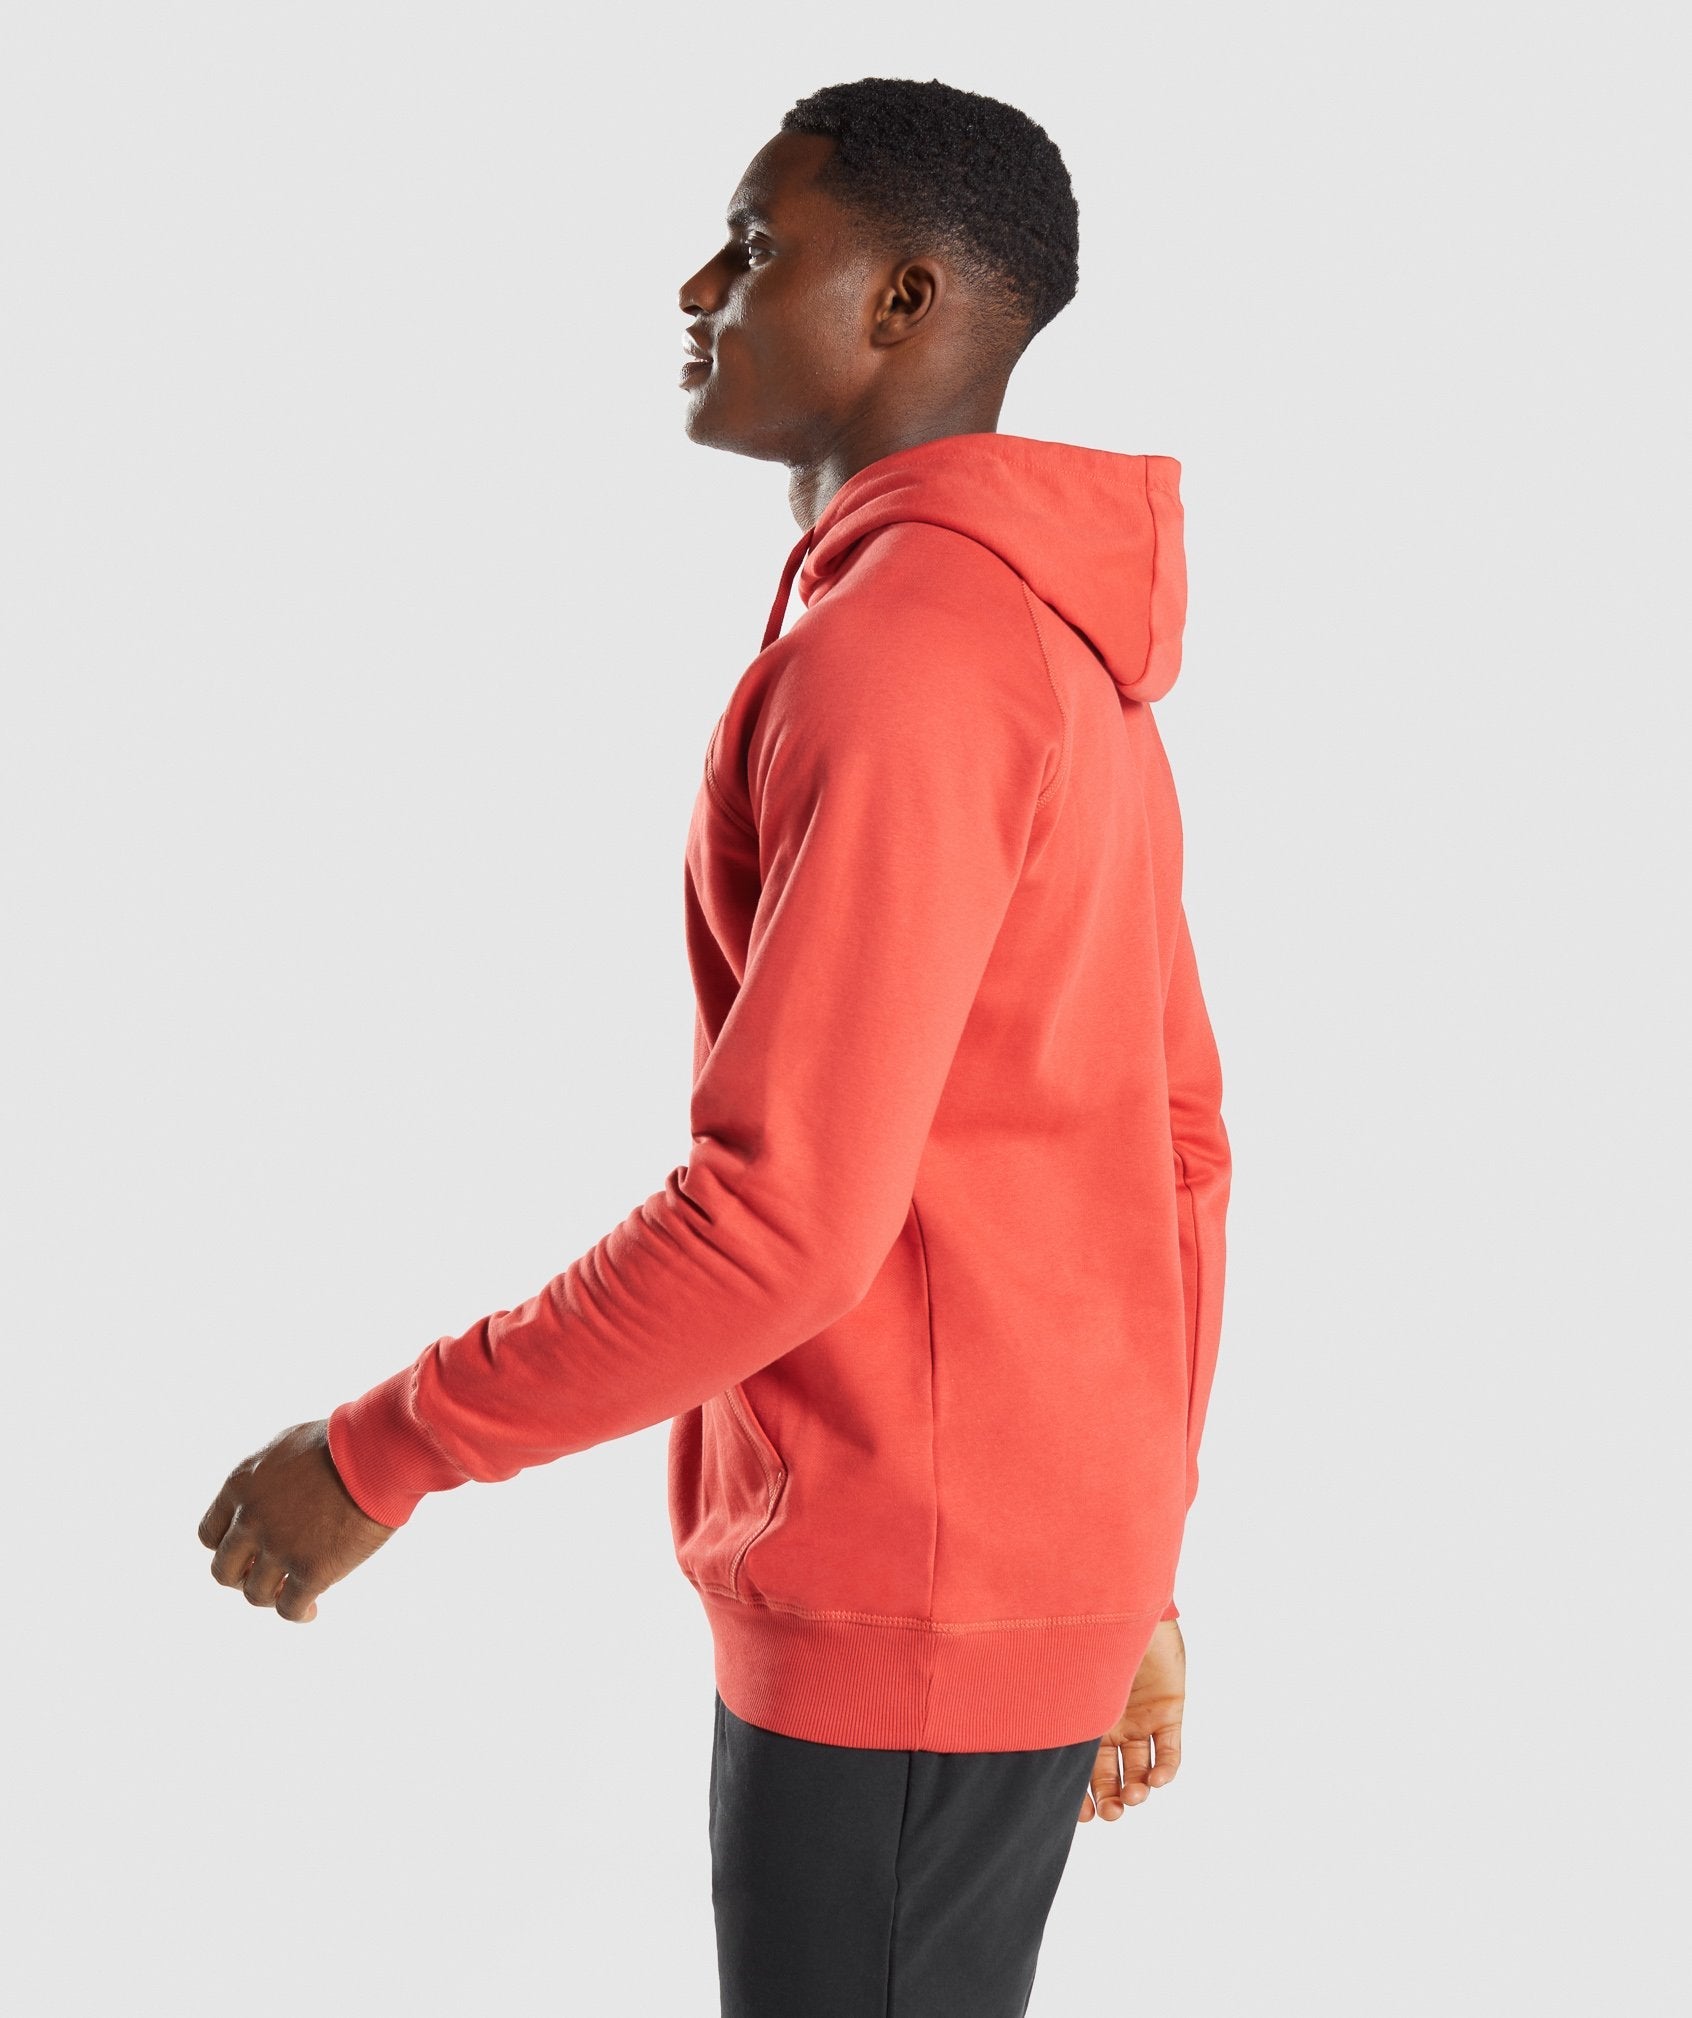 Sharkhead Infill Hoodie in Red - view 3